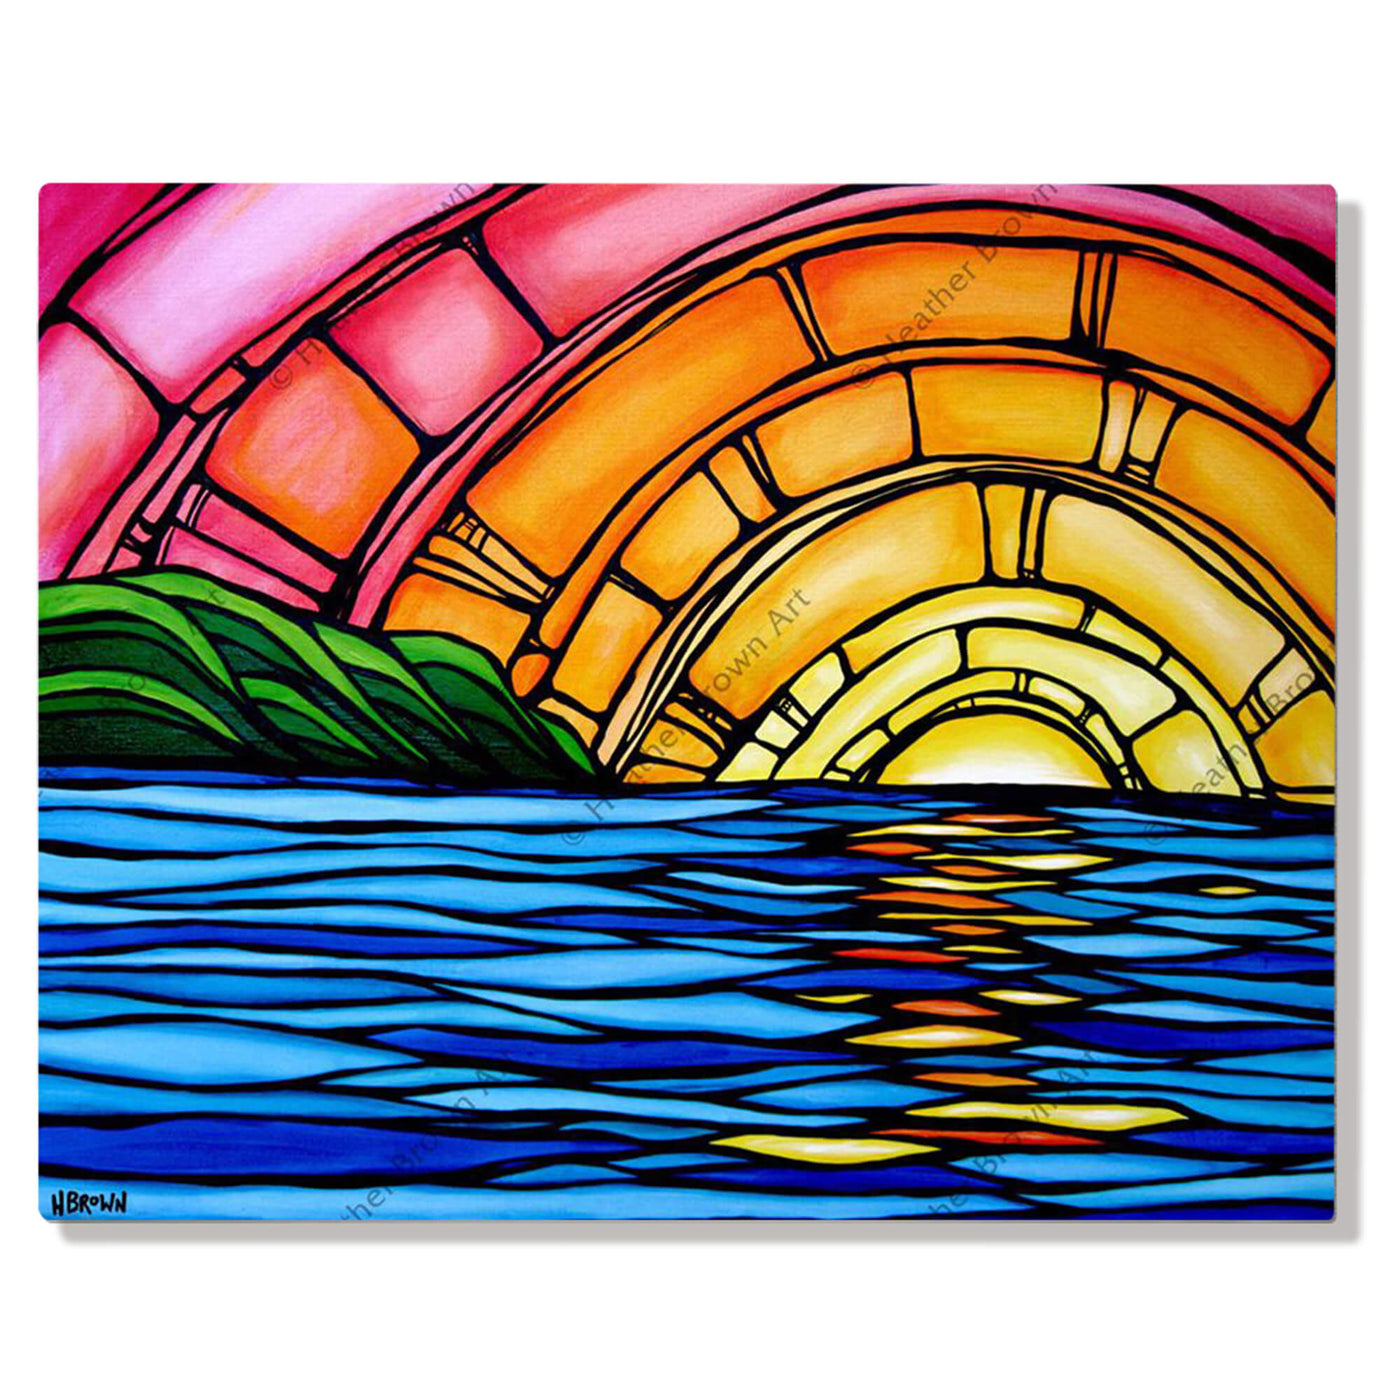 A metal art print featuring a breathtaking sunset with bright pinks and oranges where the sun drifts down into the beautiful blue horizon by Hawaii surf artist Heather Brown